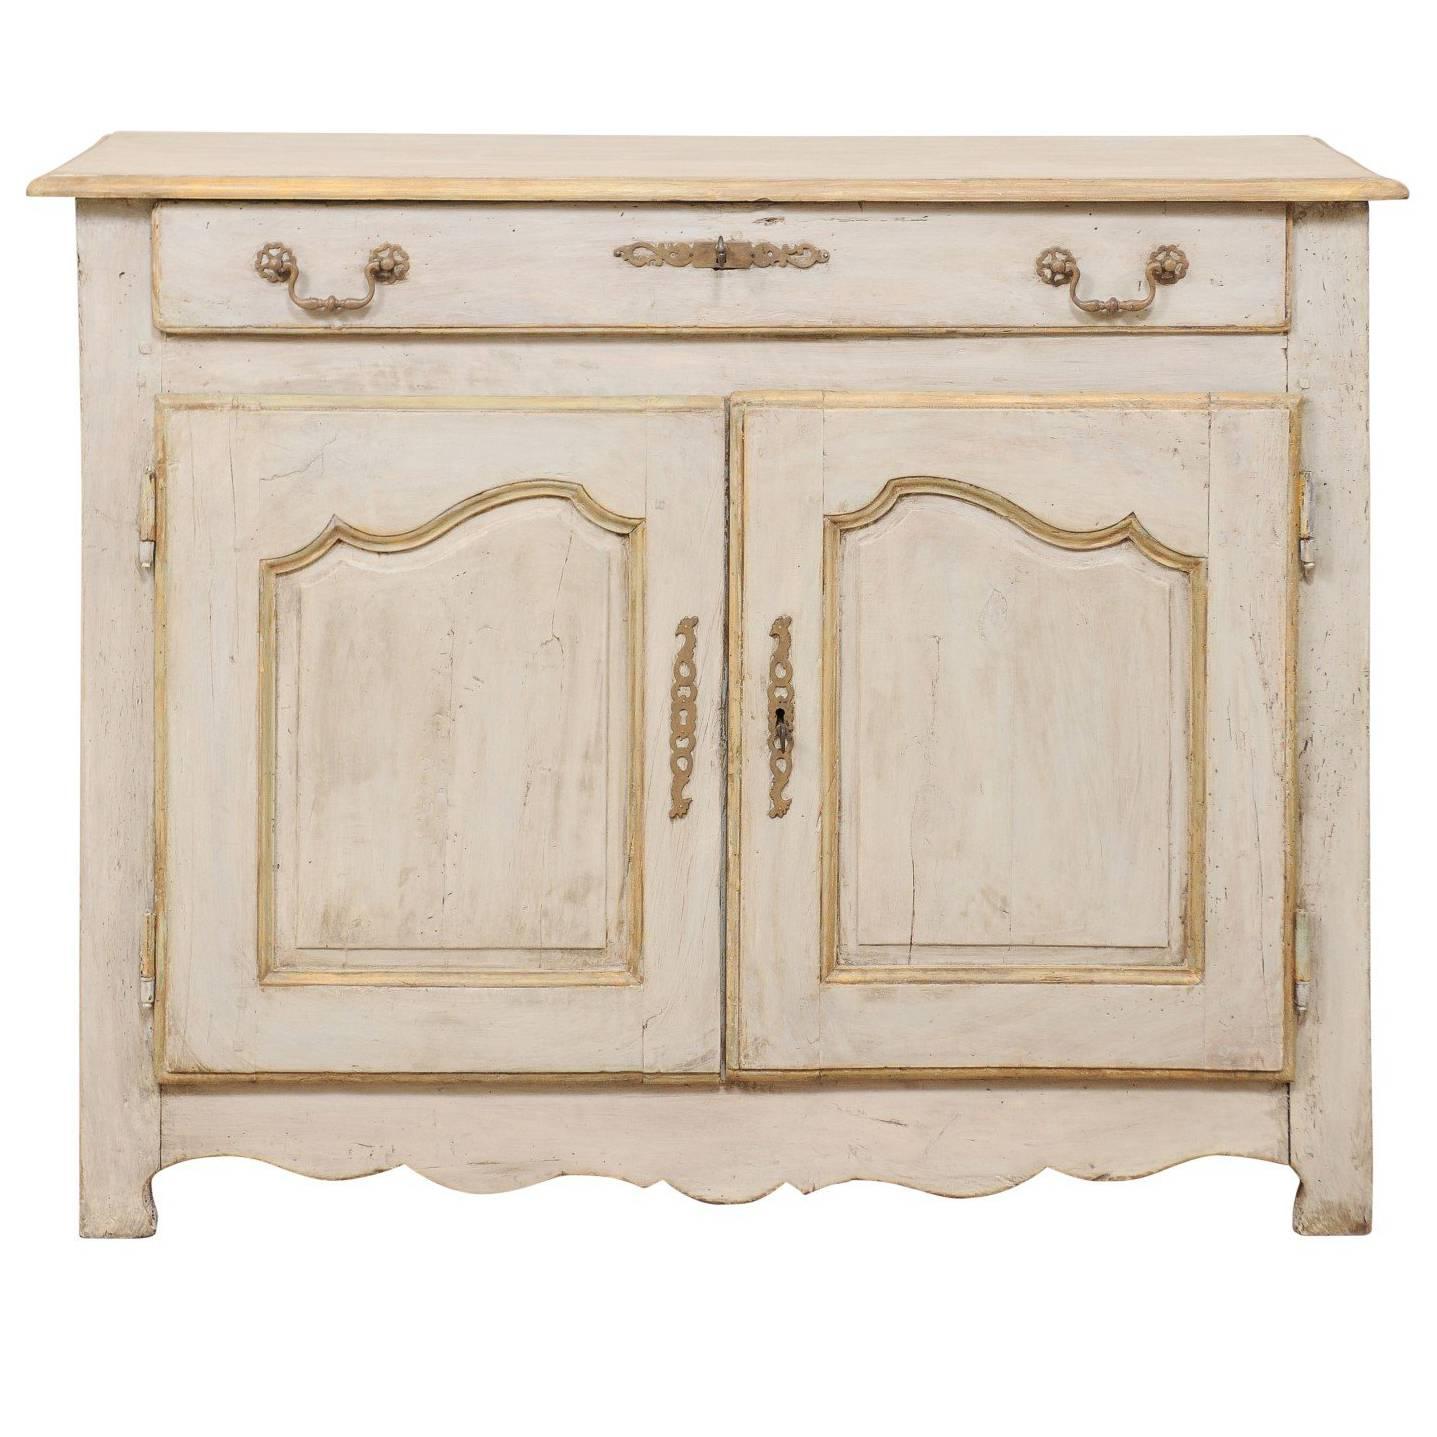 French Painted Wood Buffet in Pale Blue with Gold, Green and Beige Trim